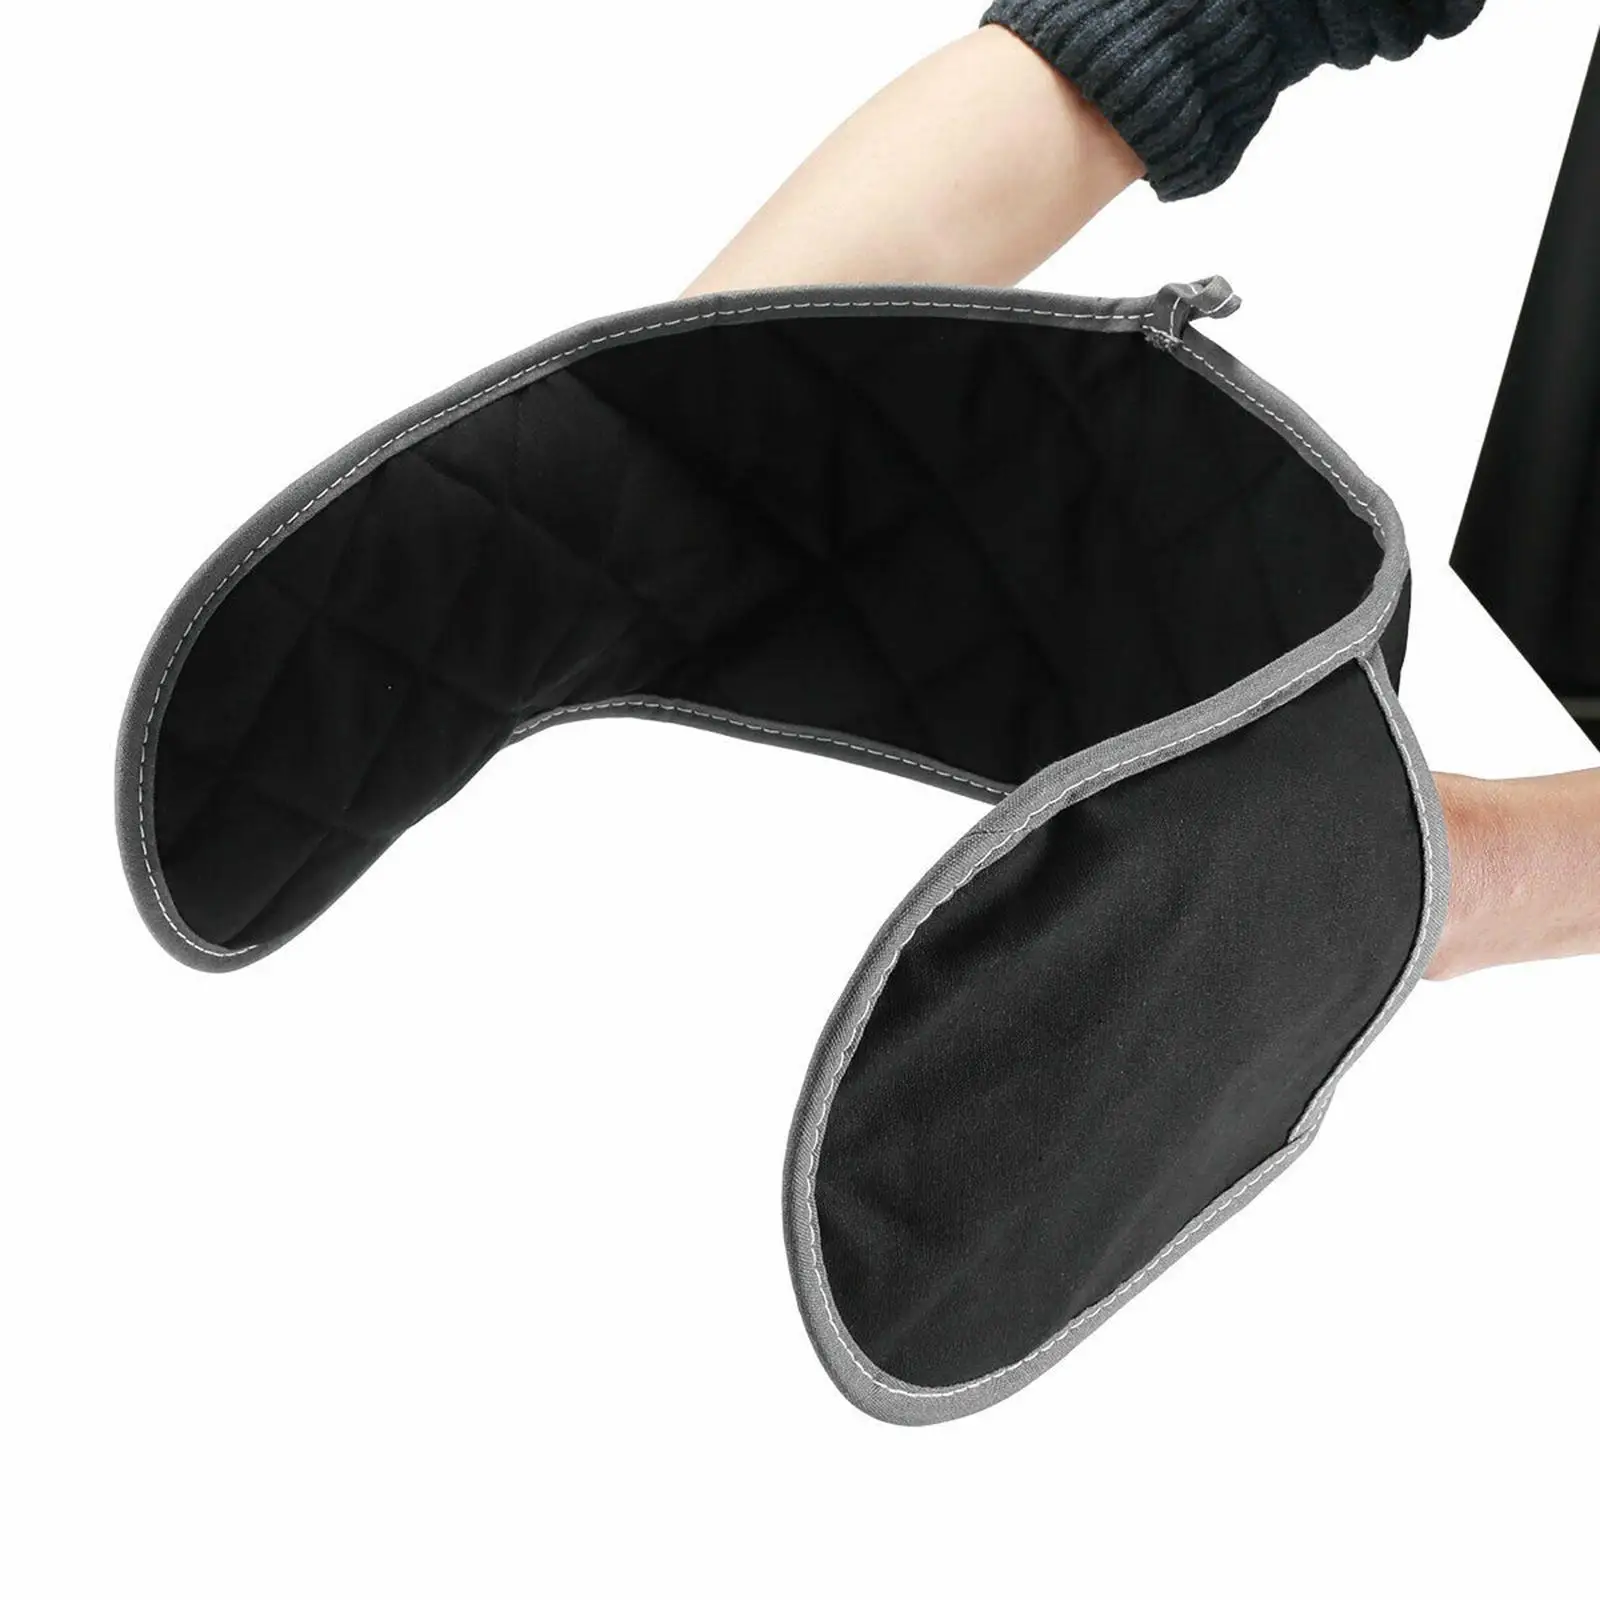 Fityle Double-Ended Oven Gloves Anti-scalding Waterproof Microwave Barbecue